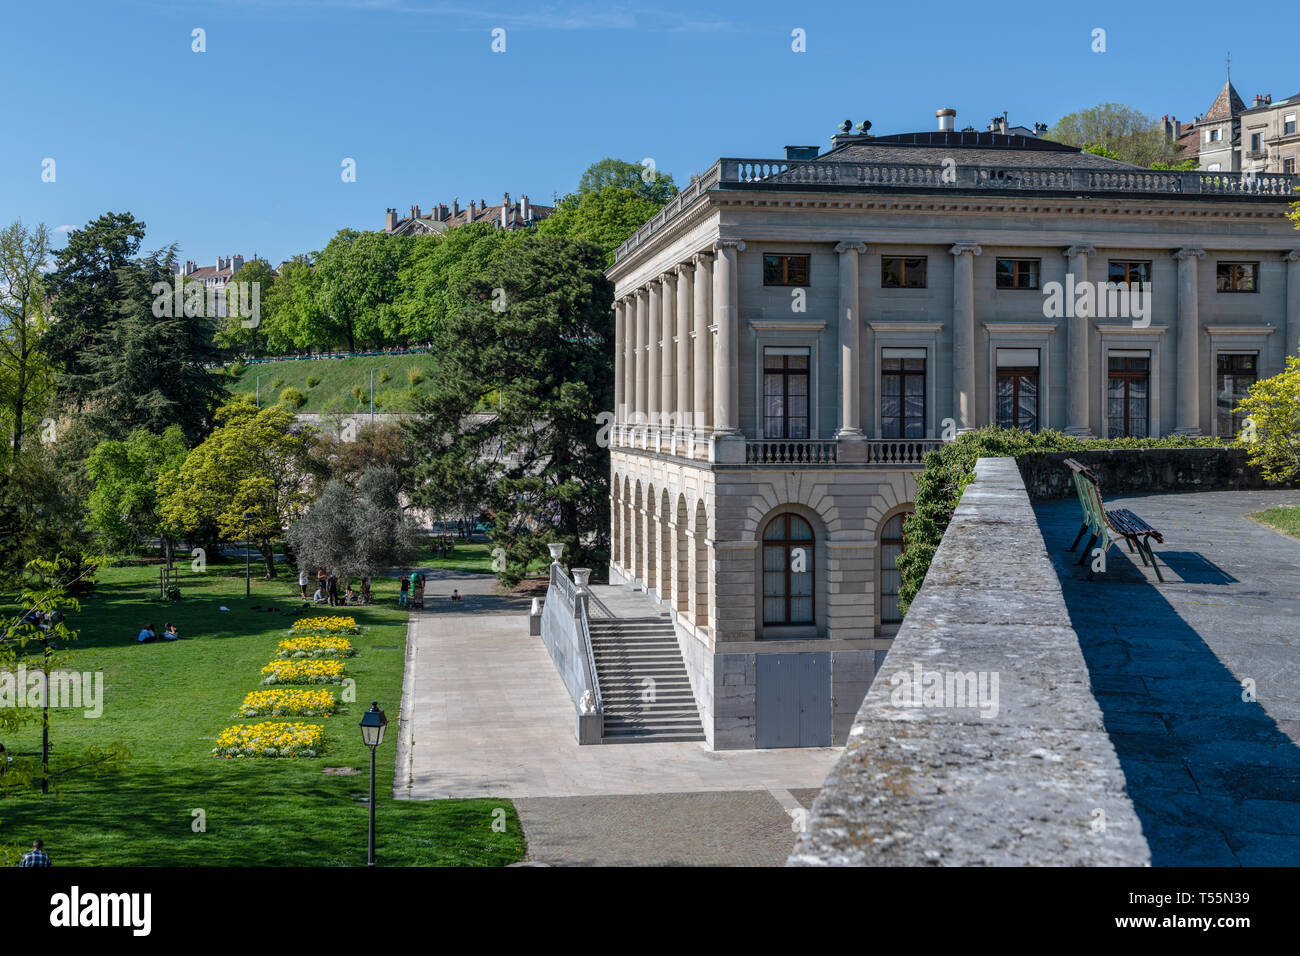 The Palais Eynard in the old town of Geneva, Switzerland overlookin at the Parc des Bastions. Stock Photo